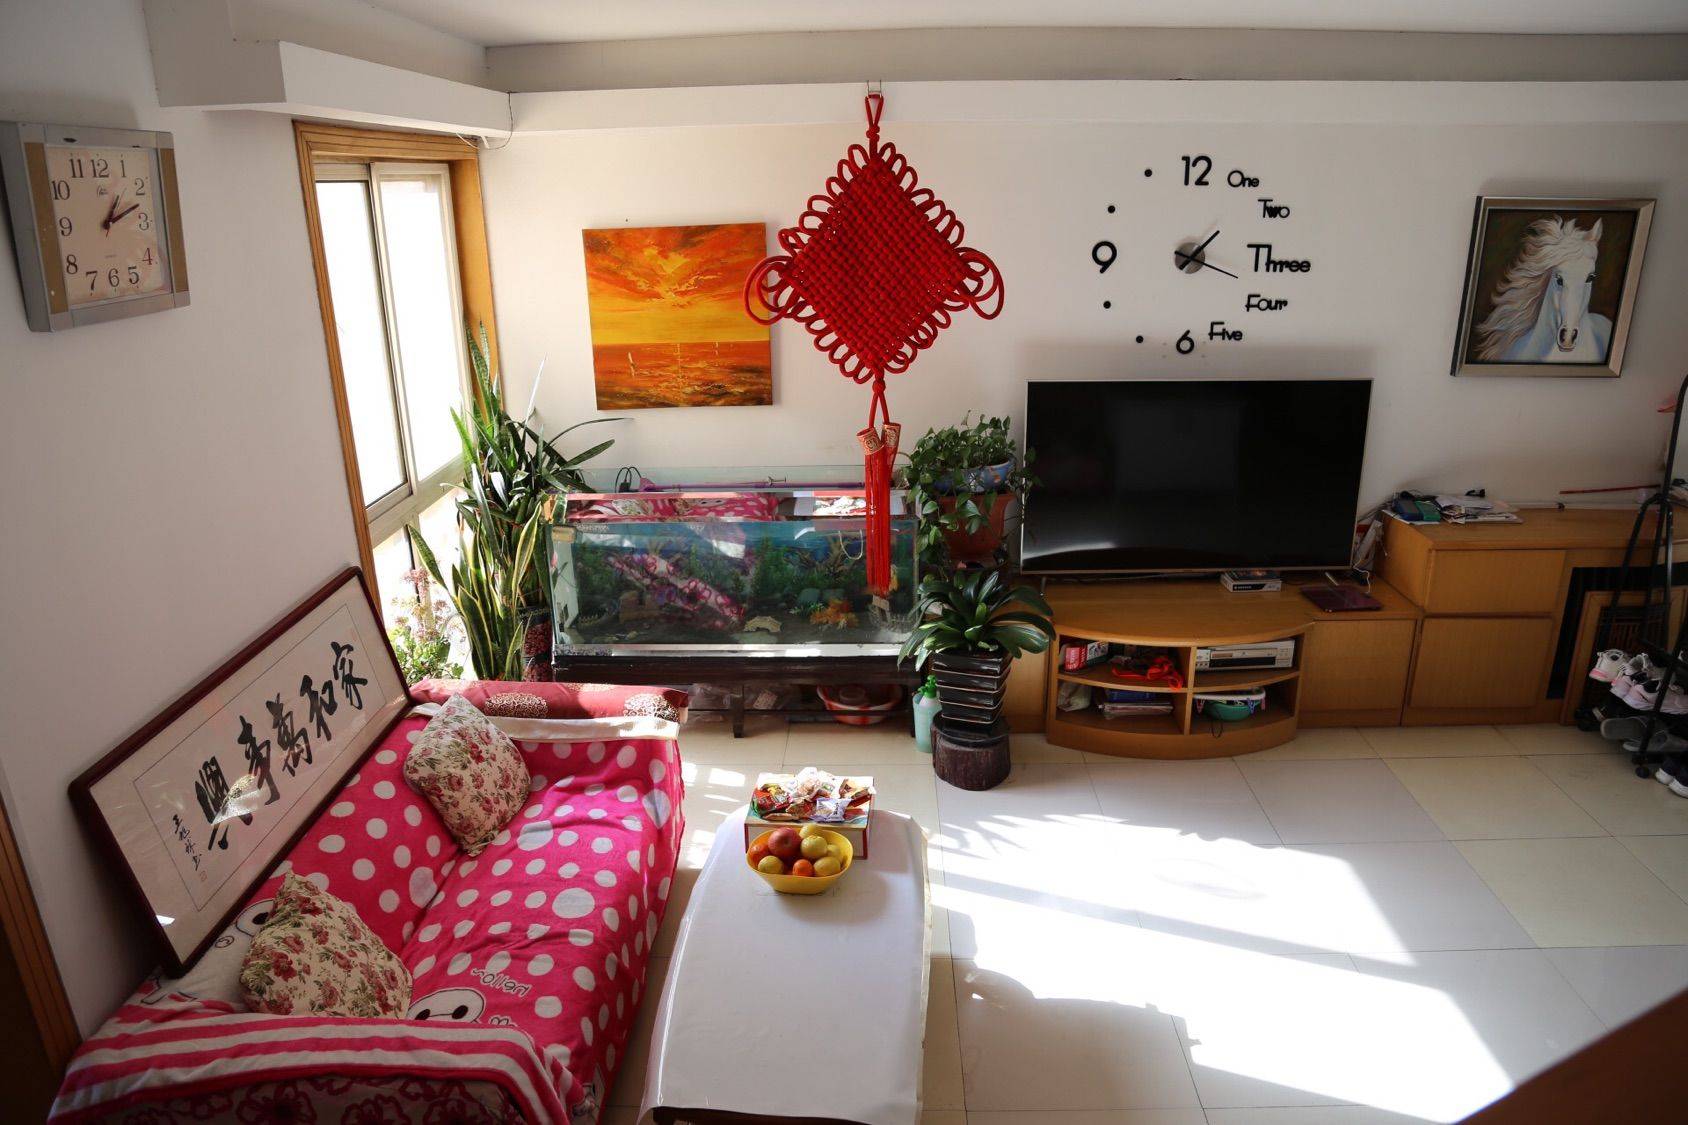 Beijing-Daxing-80RMB/Night,Cozy Home,Clean&Comfy,Hustle & Bustle,Chilled